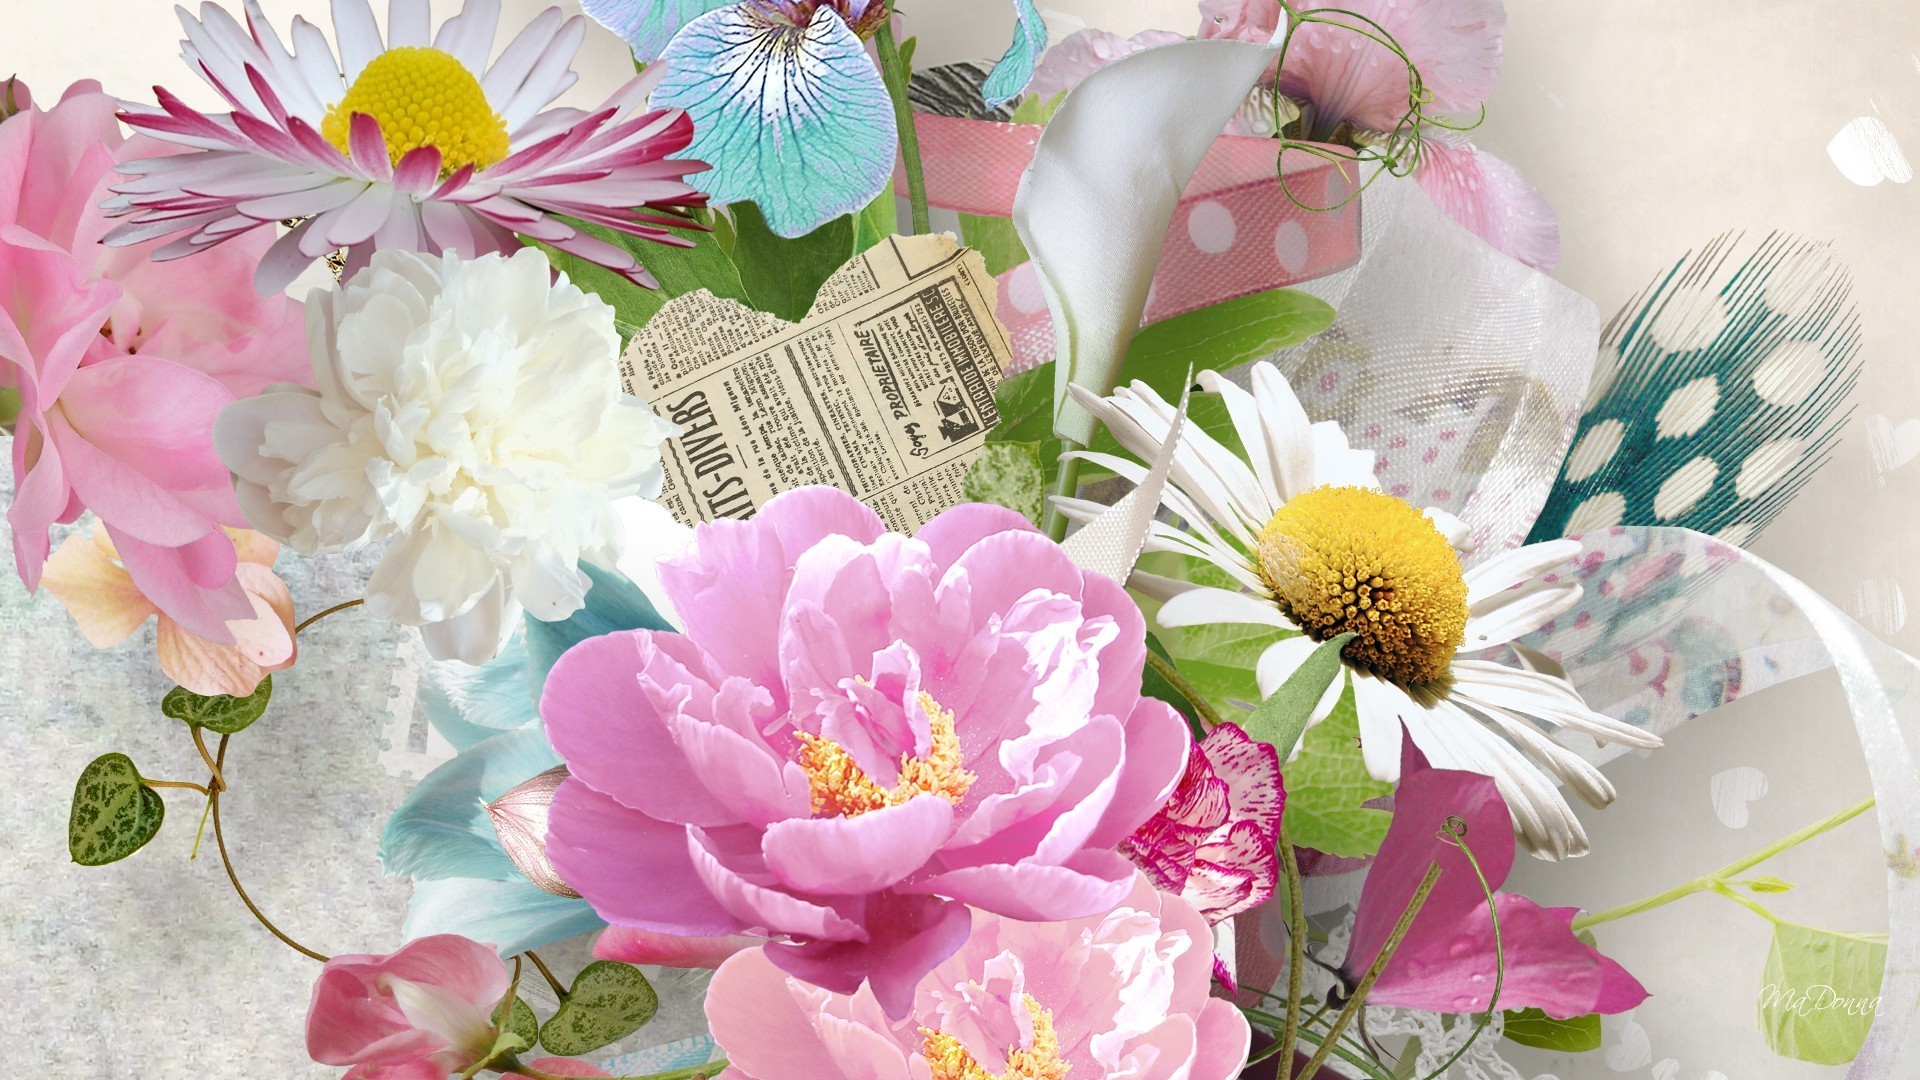 1920x1080 Soft Tag - Daisy Feathers Flowers Newspaper Pink Iris Floral Summer Ribbon  Peony Heart Soft Screen